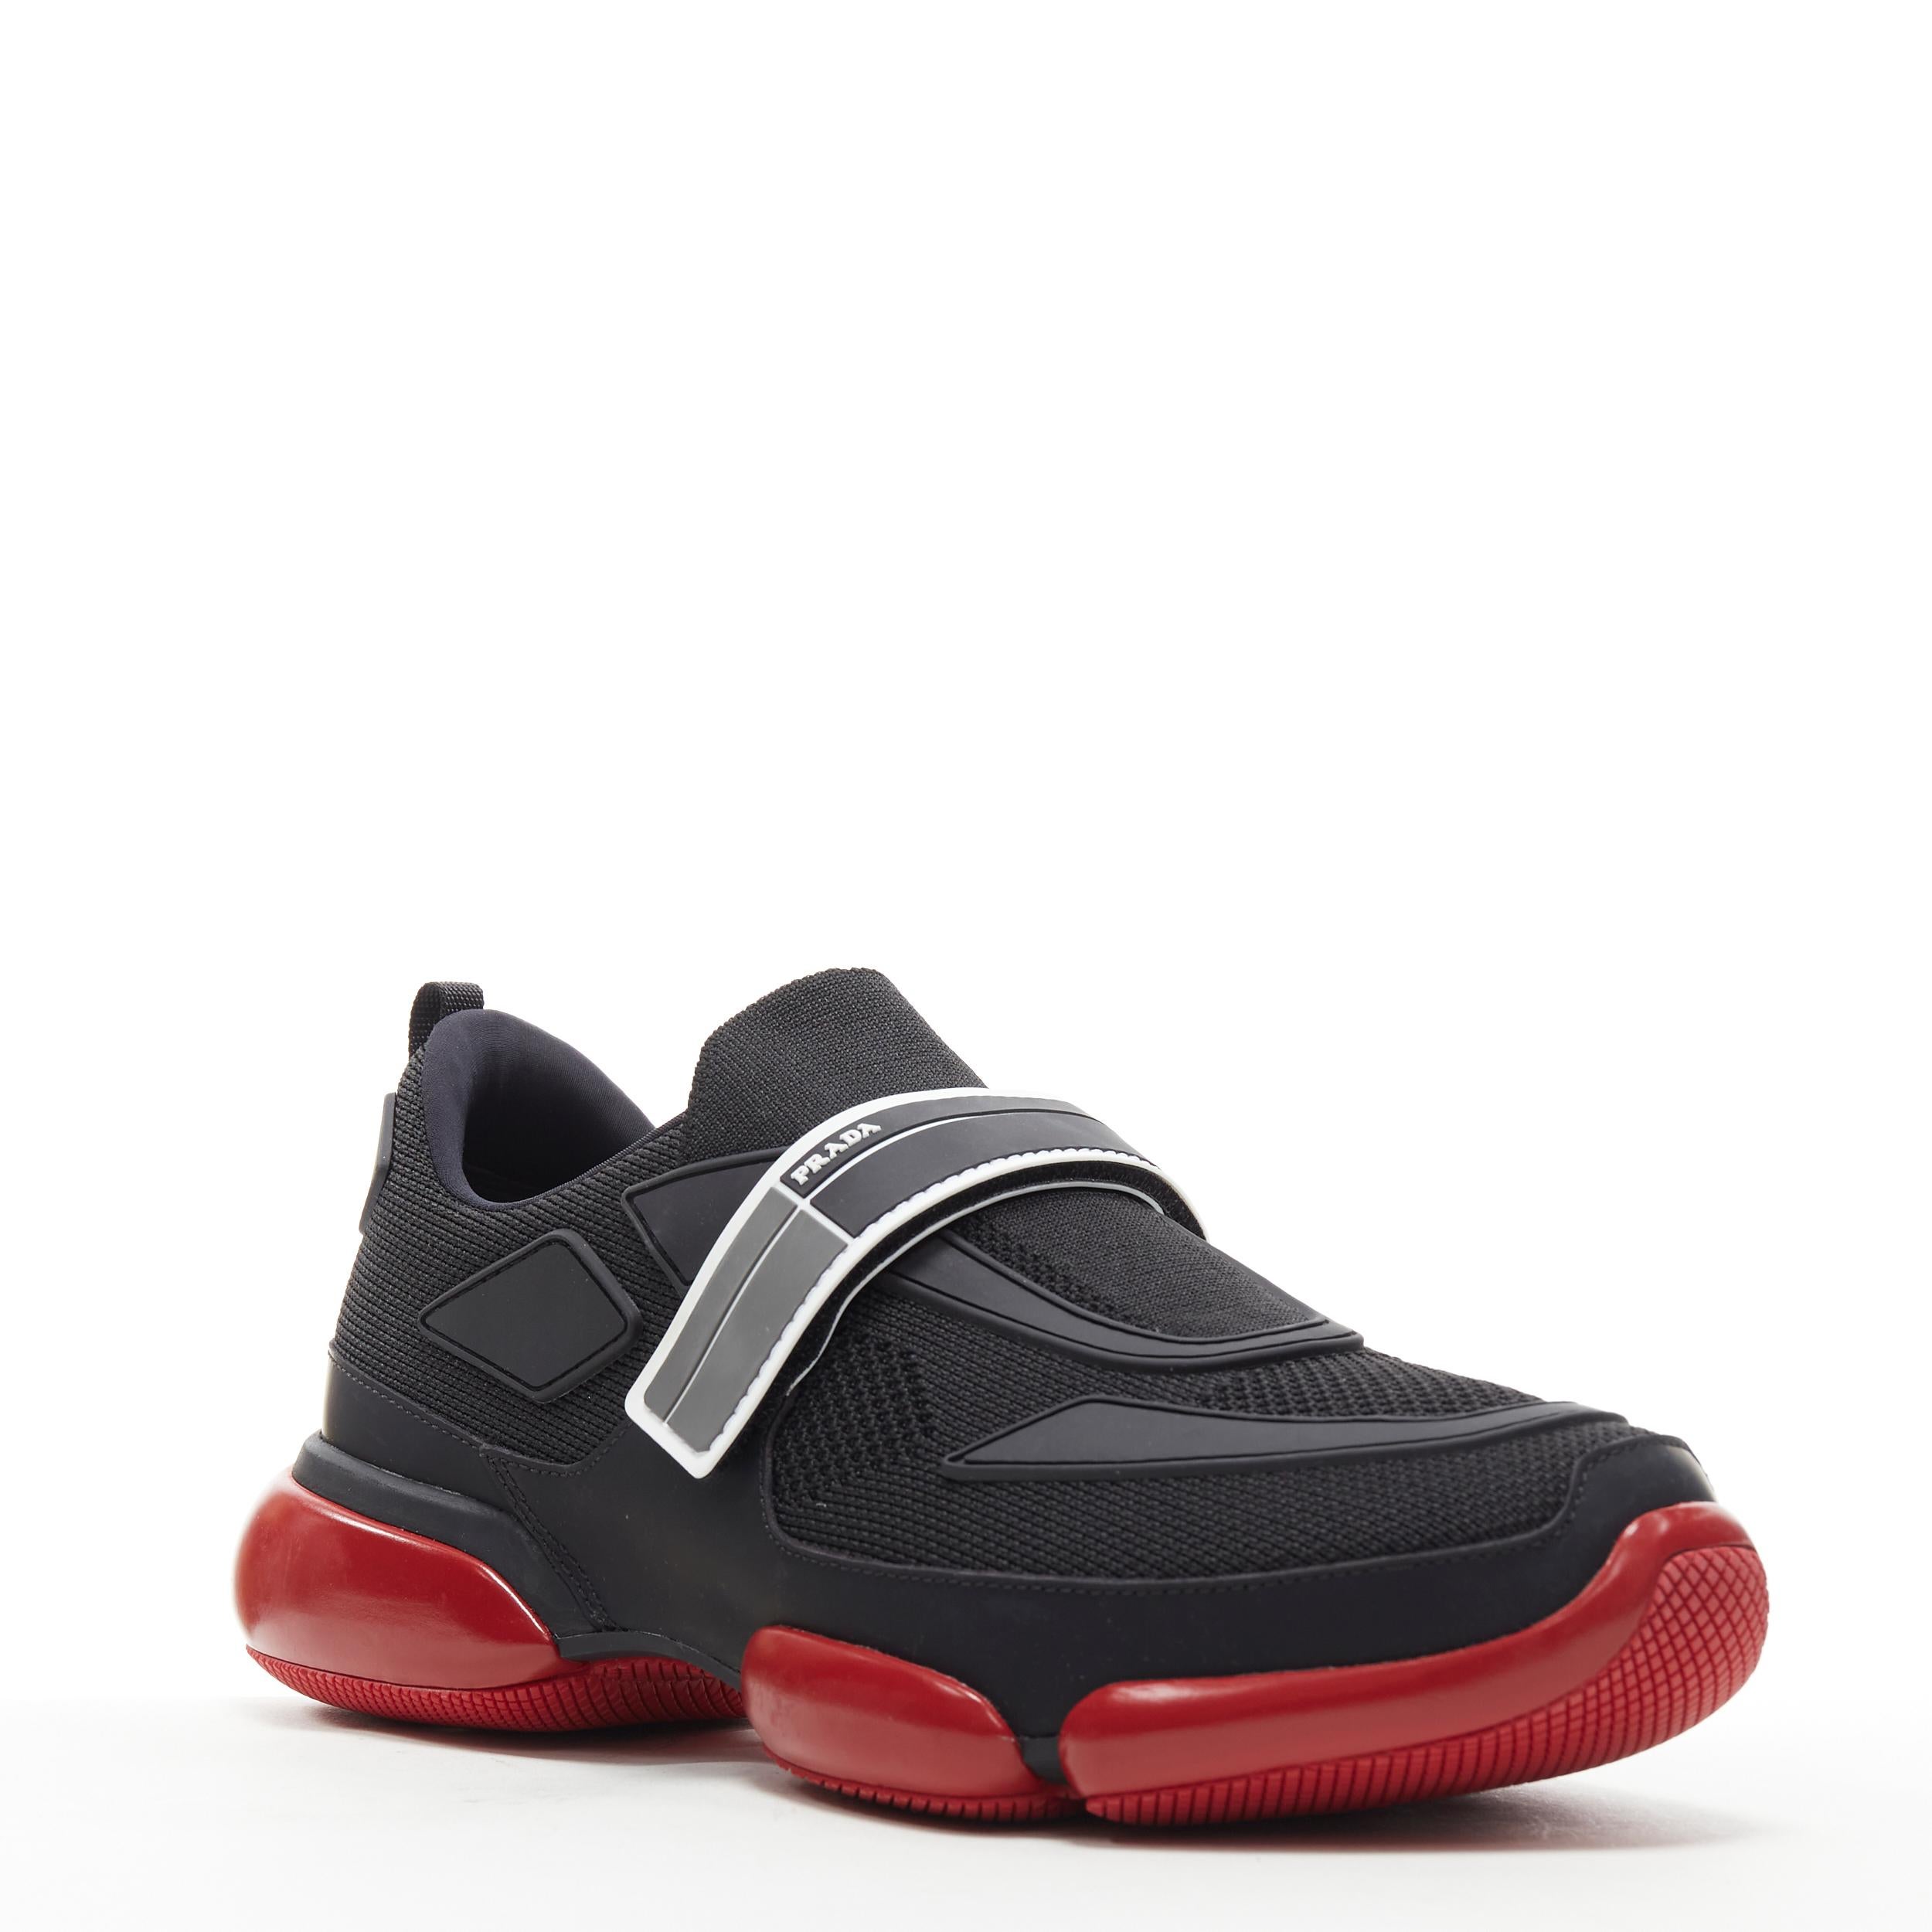 new PRADA Cloudbust black red logo rubber strapped low top 